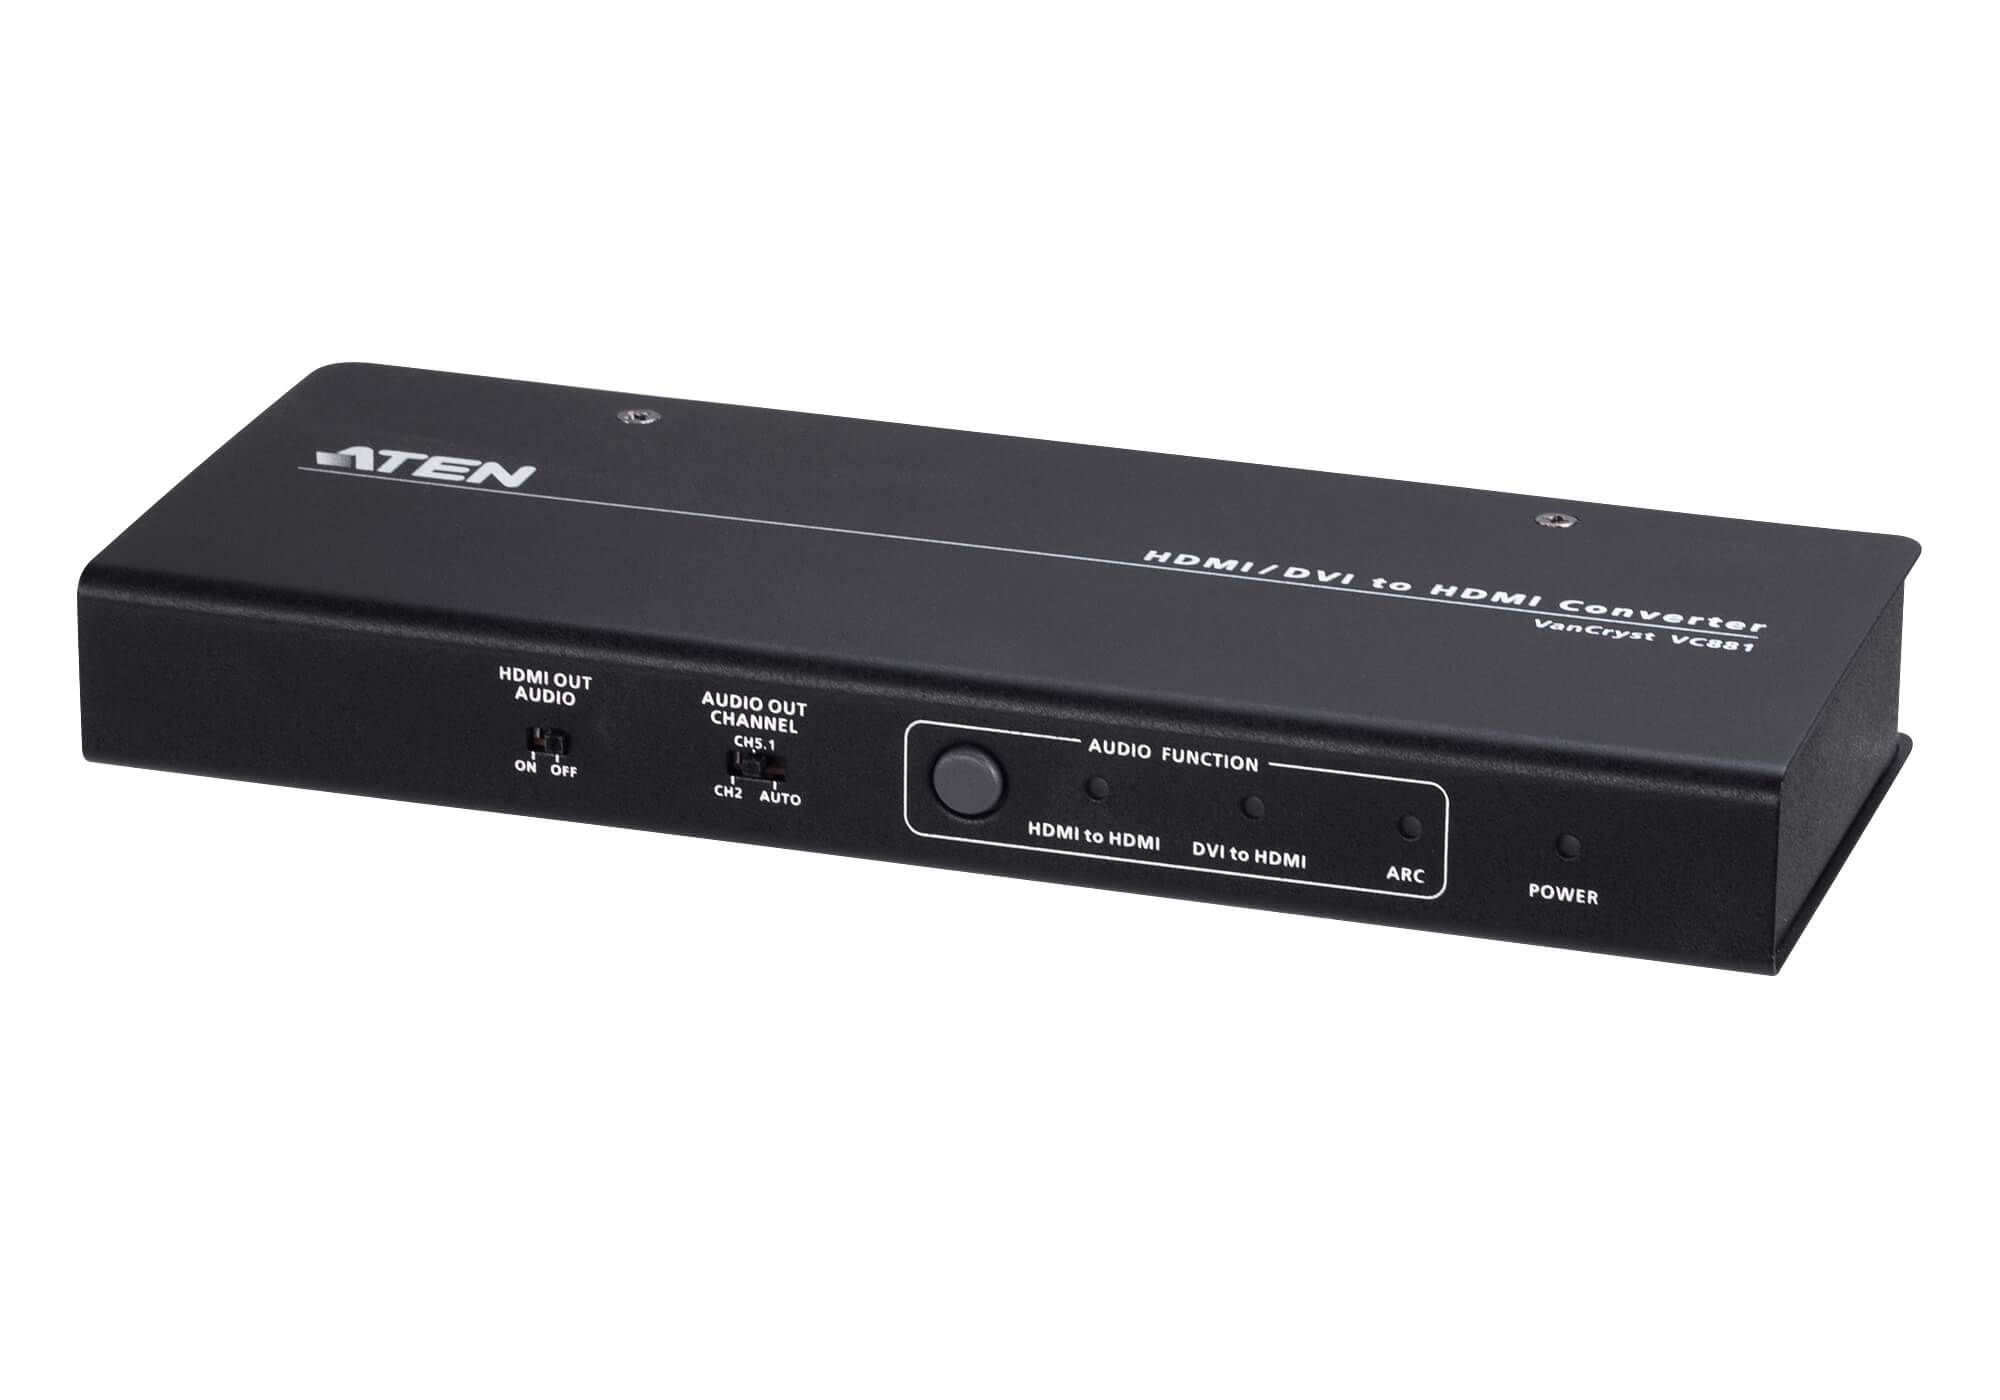 Aten, 4K, HDMI/DVI, to, HDMI, Converter, with, Audio, De-Embedder, supports, ARC, and, DVI, +, Audio, In, to, HDMI, conversion, analog, au, 